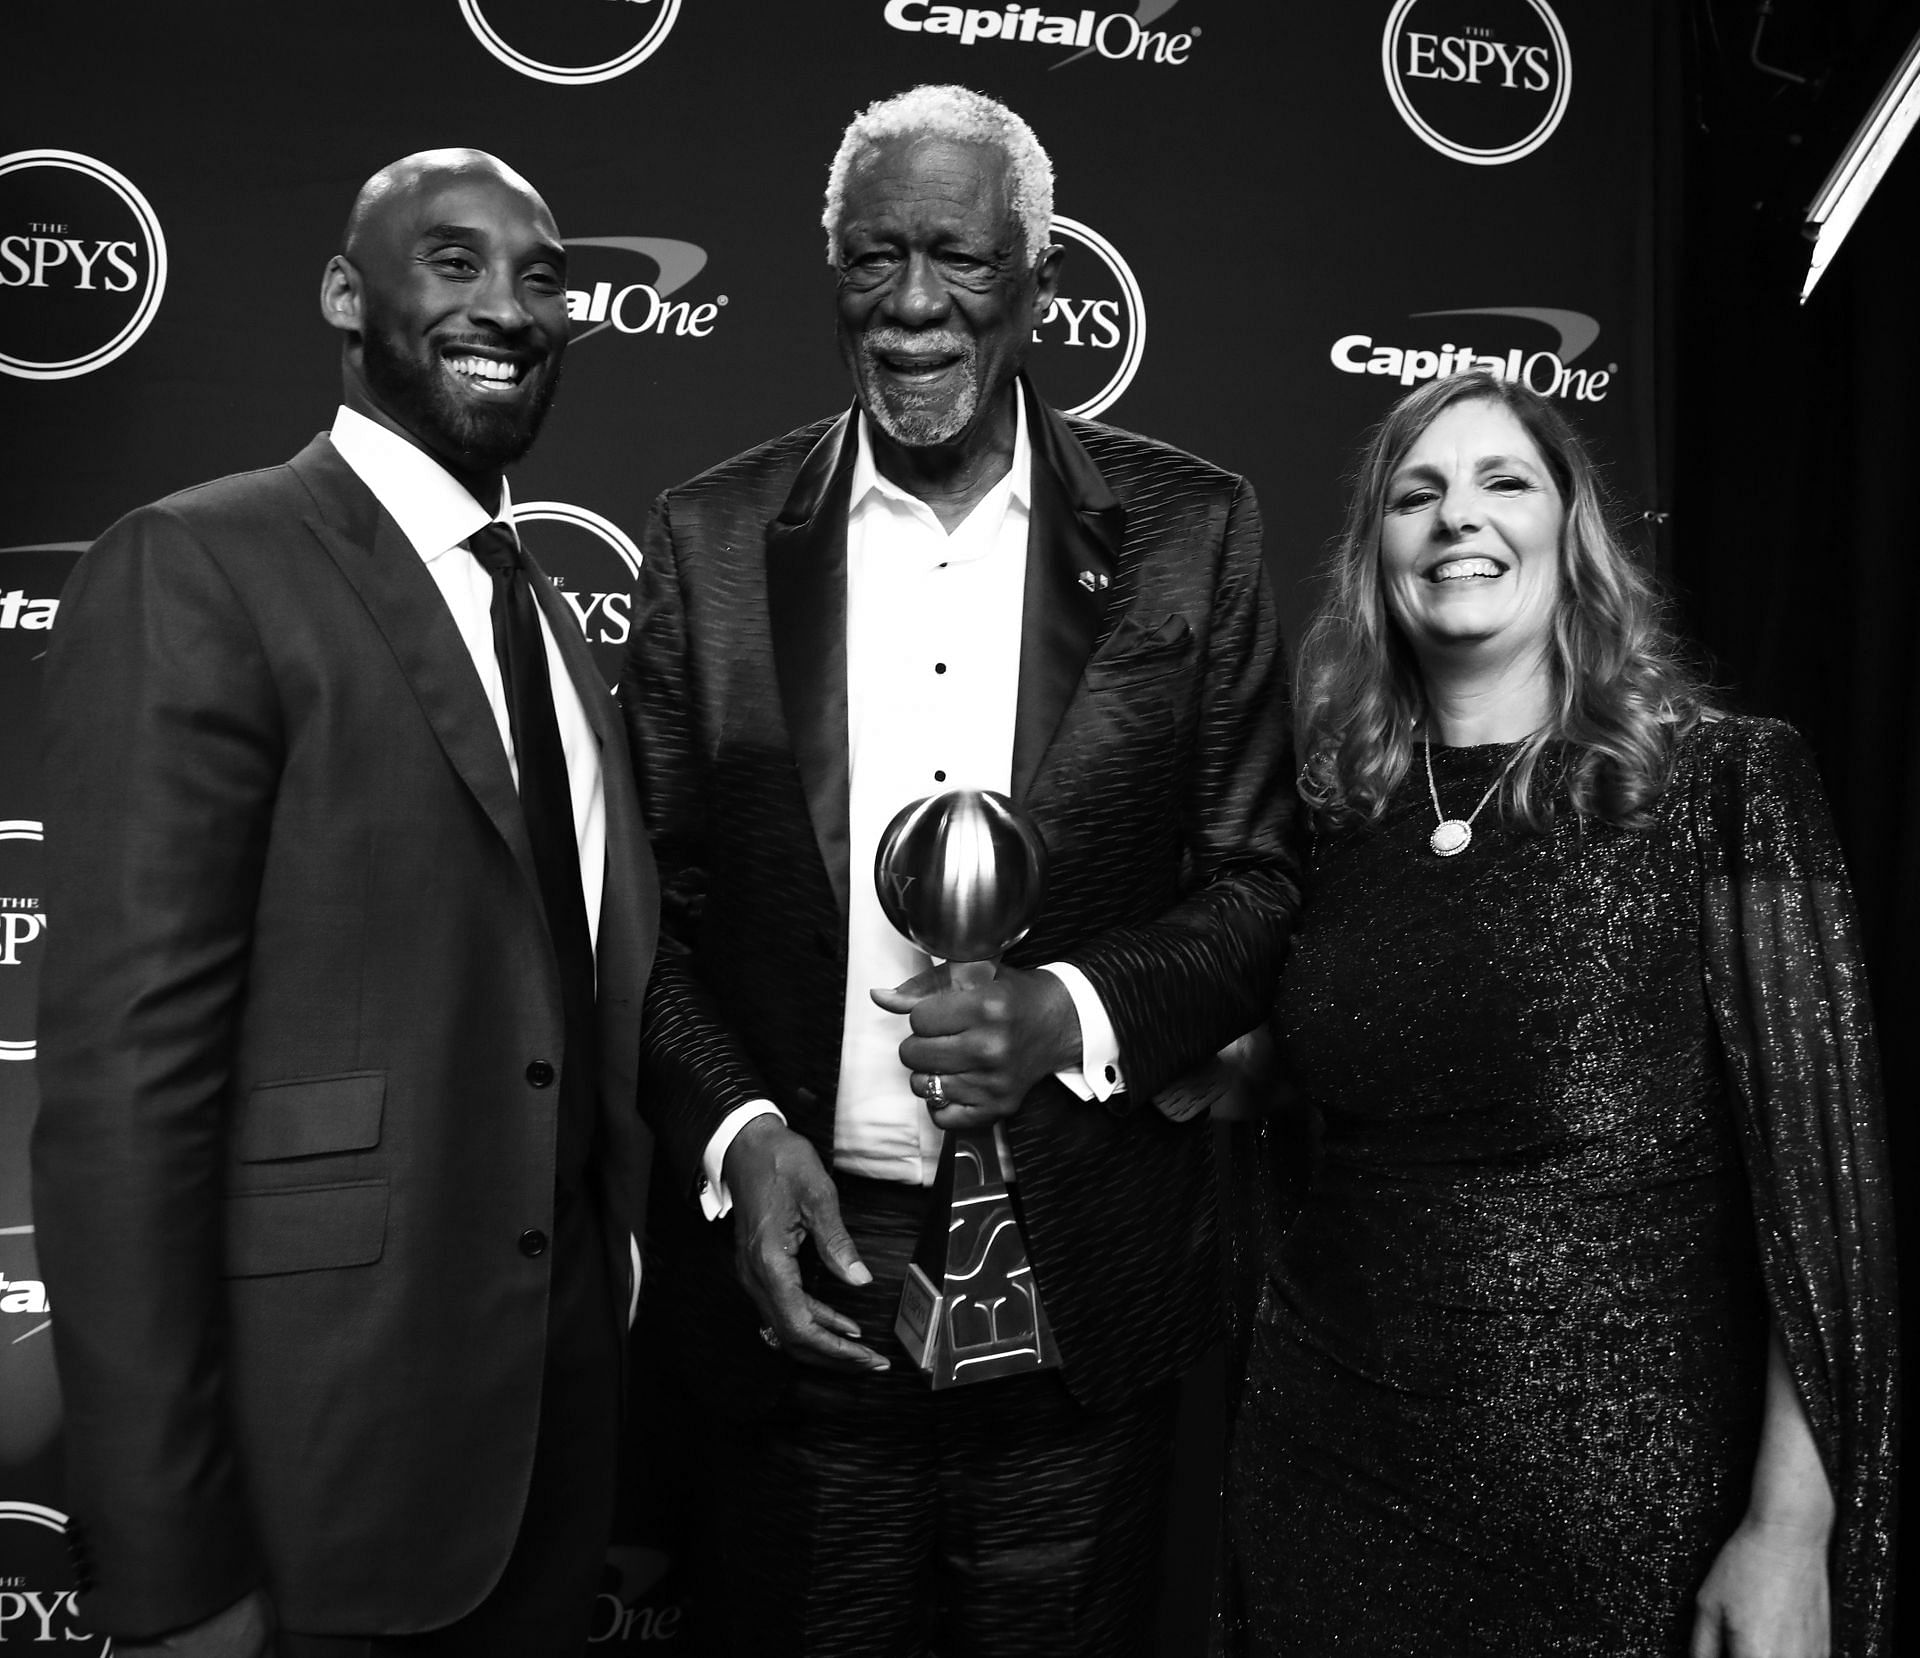 Bill Russell passed away at the age of 88